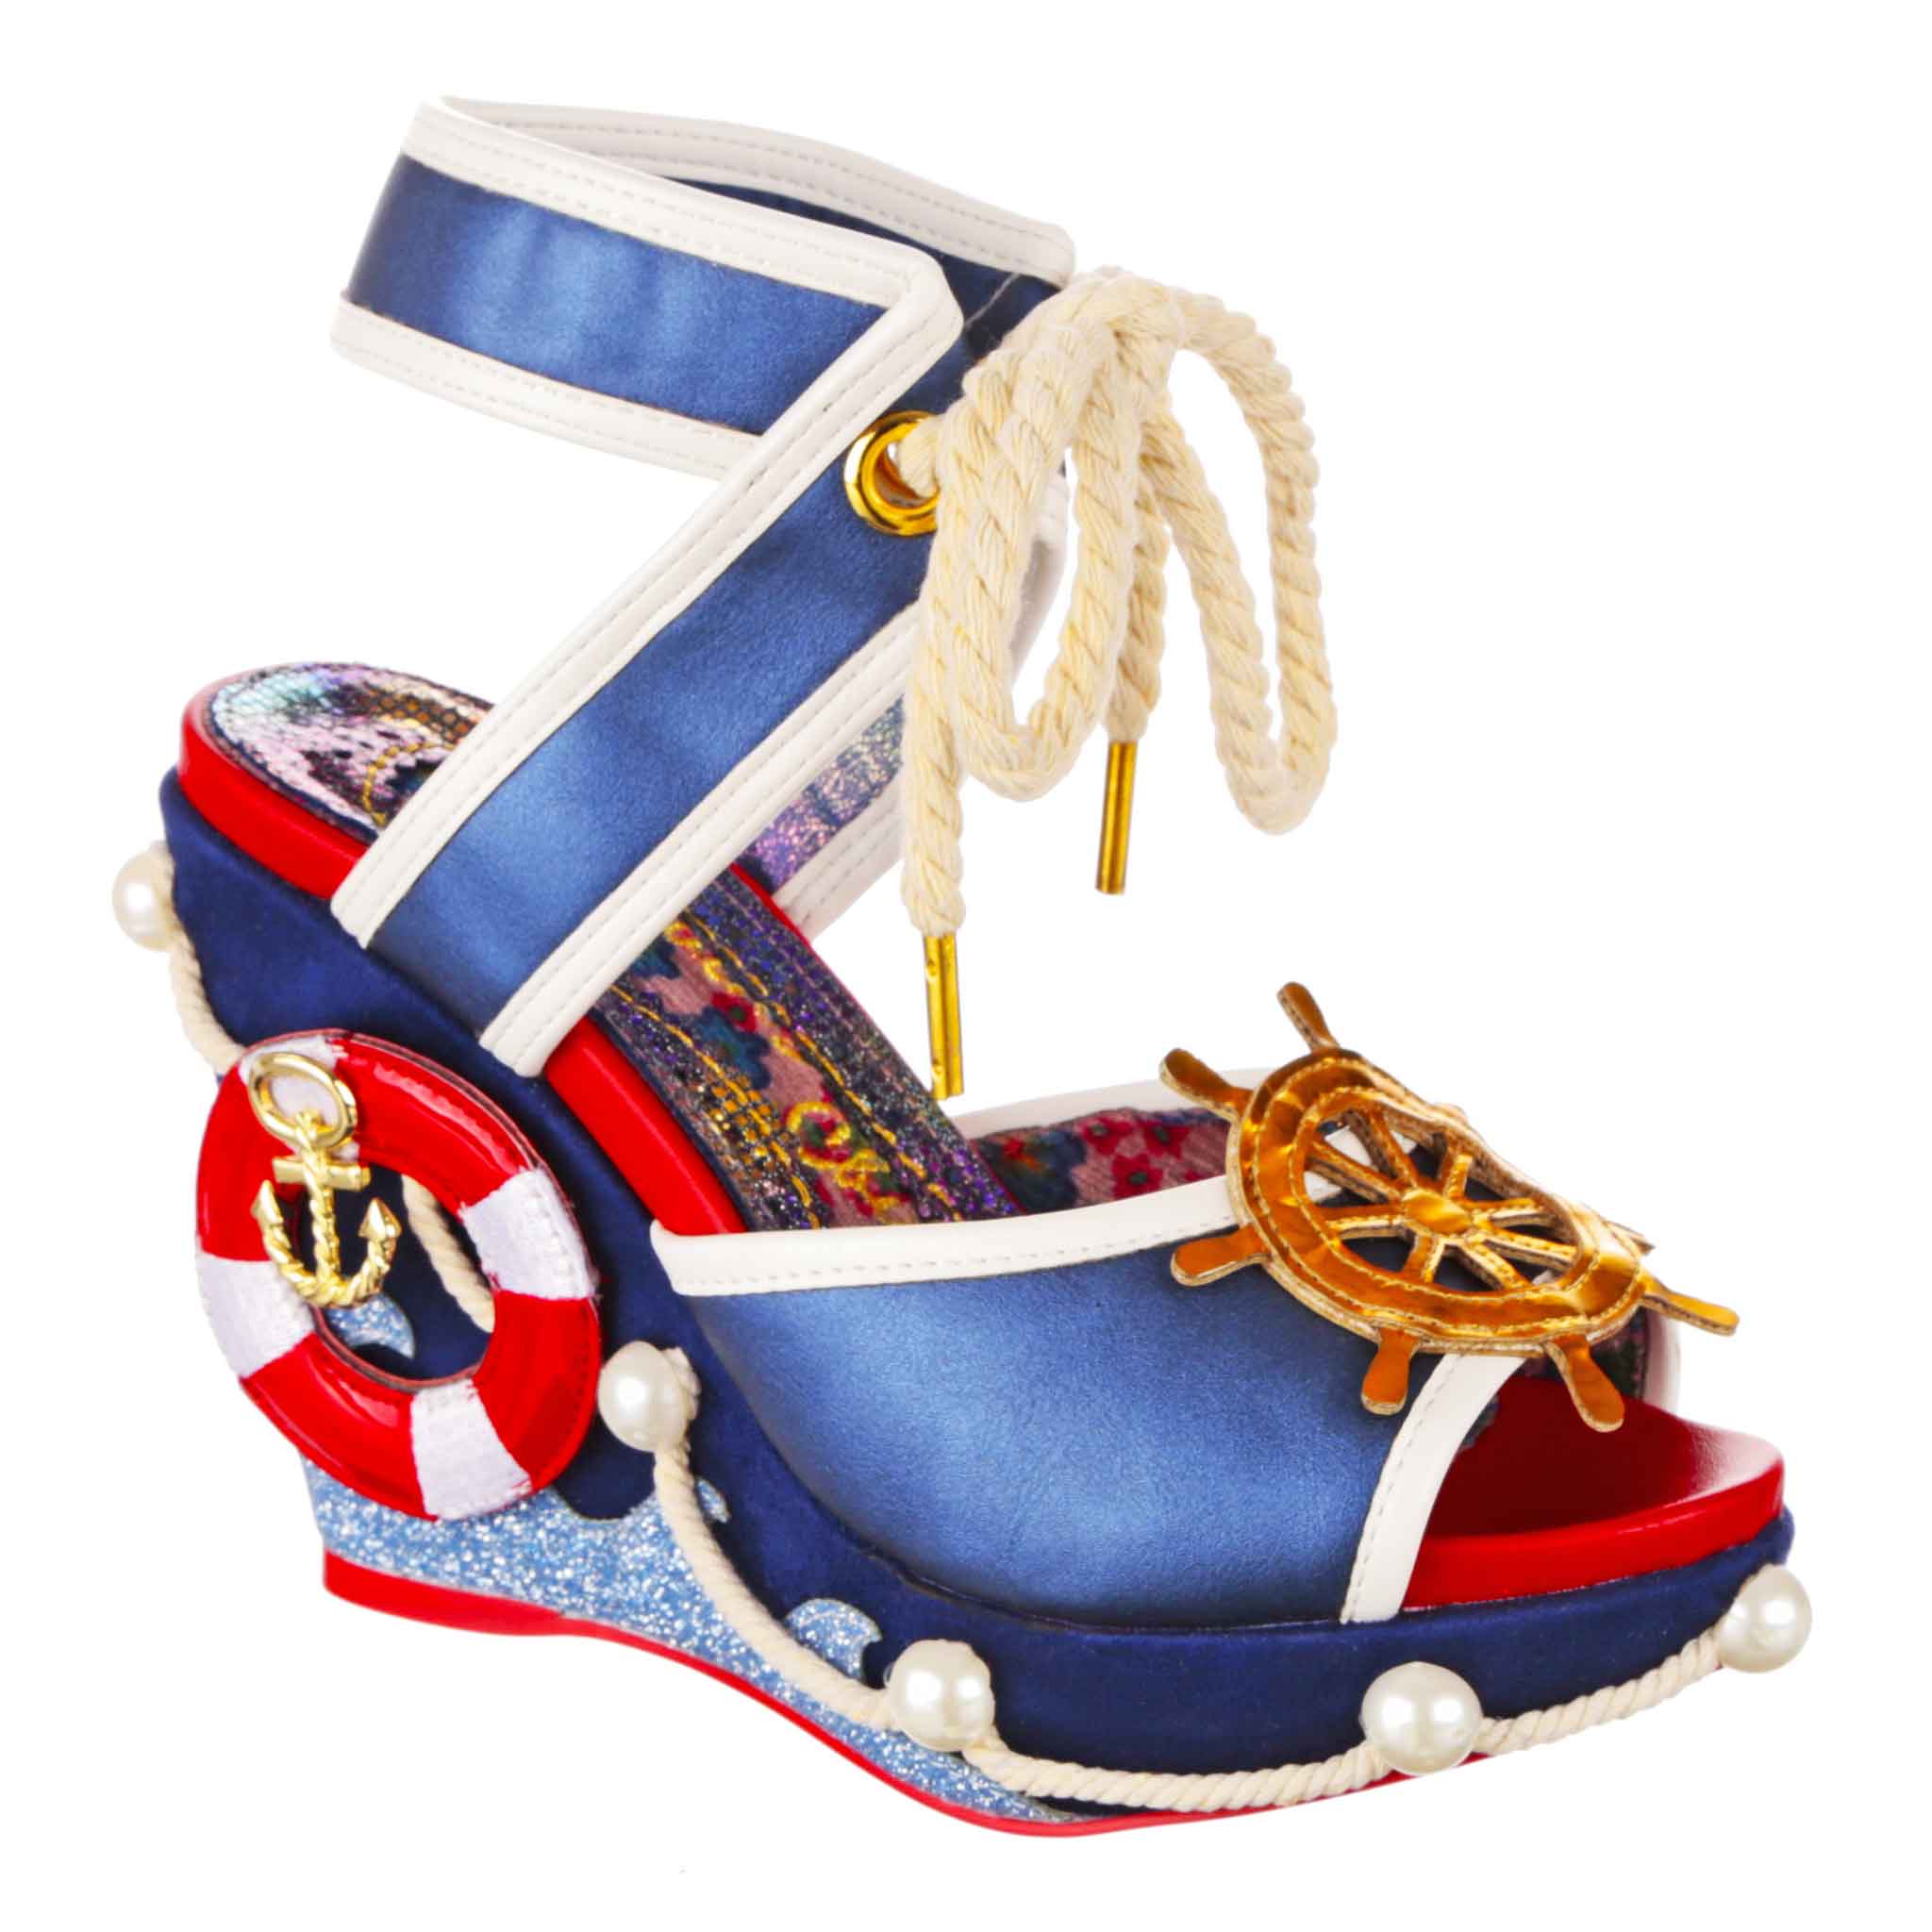 Irregular Choice - Original Footwear to Stand Out From the Crowd